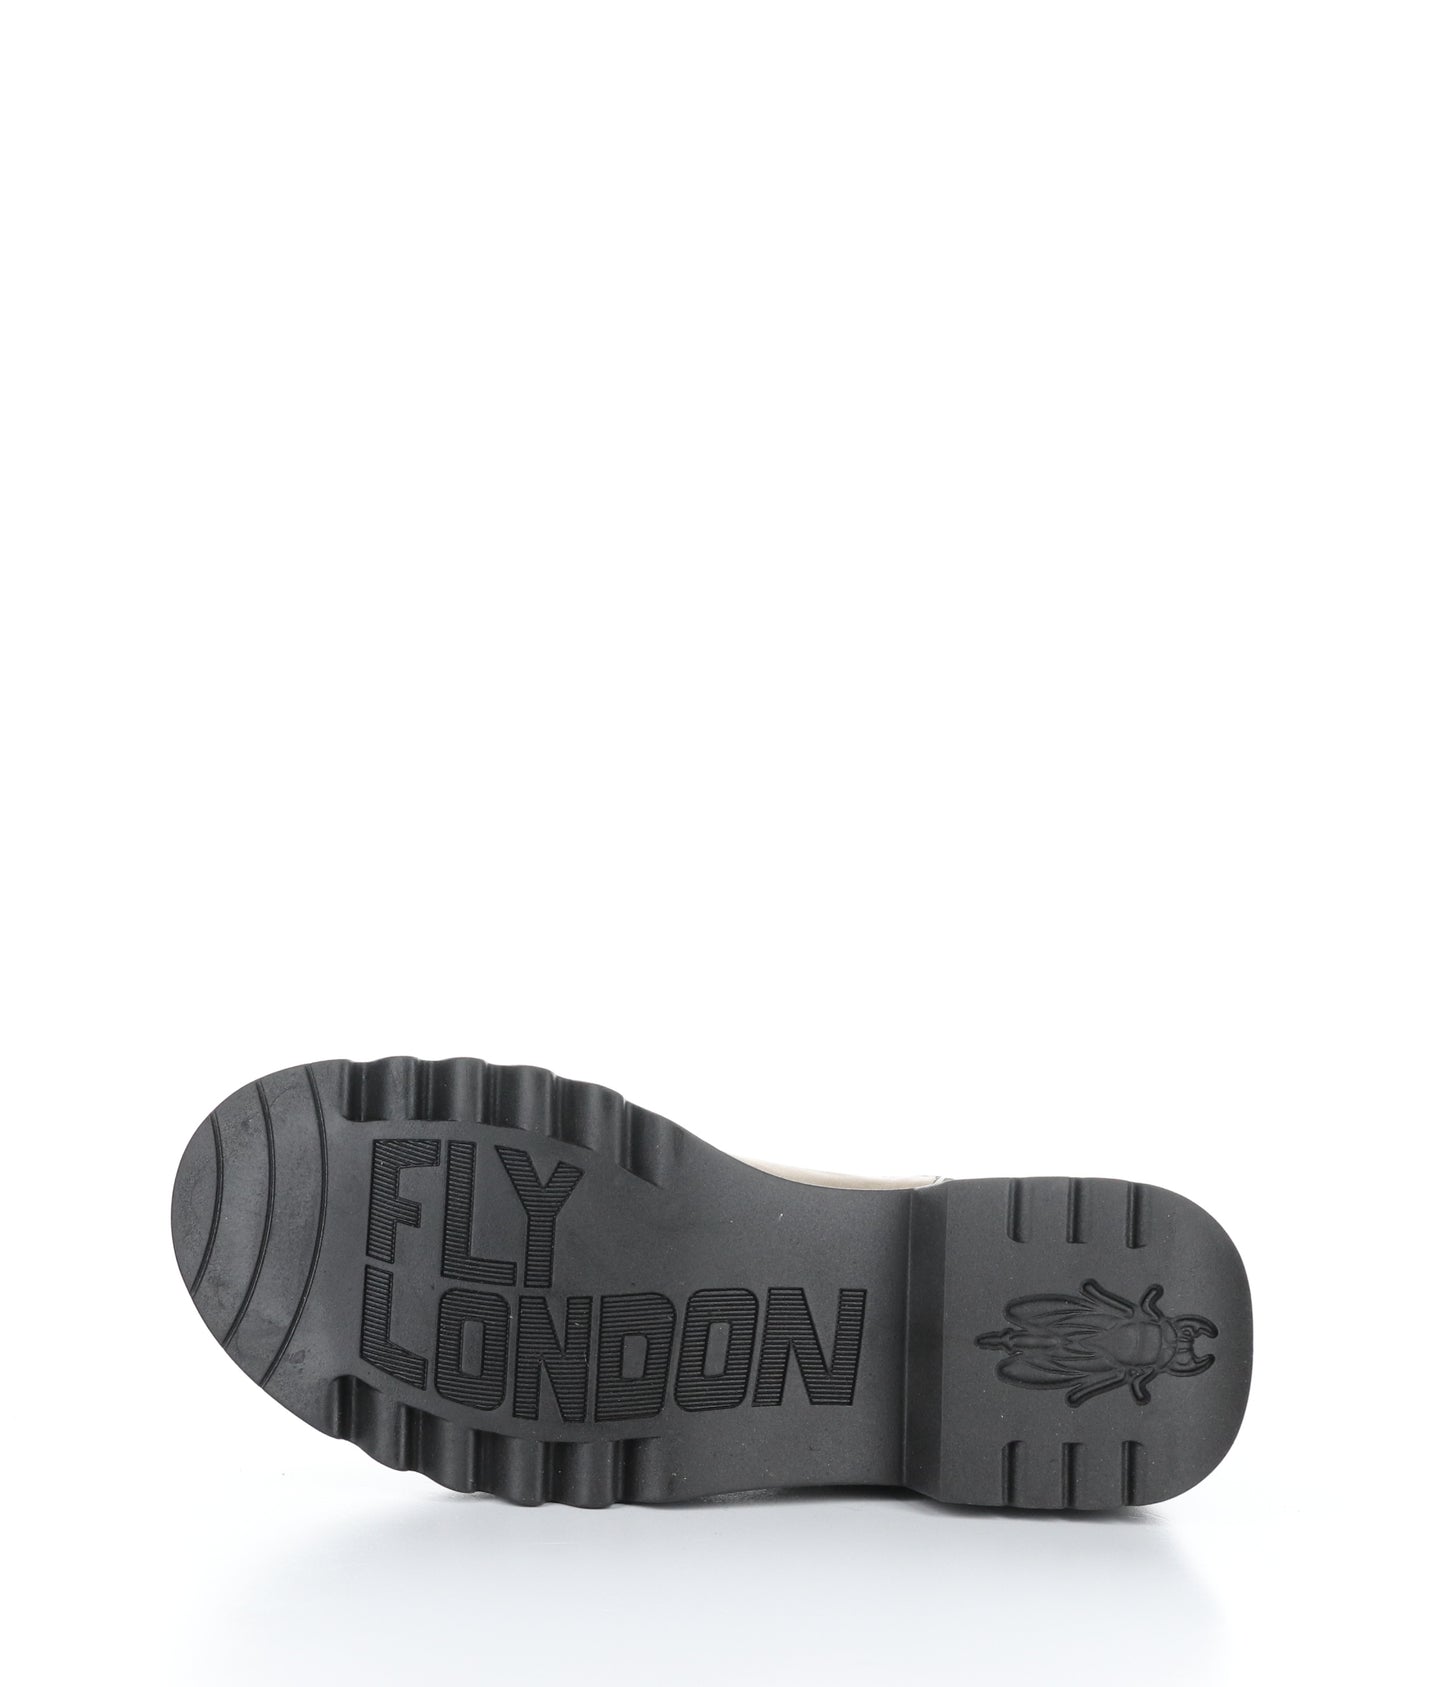 The black rubber sole of a boot with medium tread and the brand name Fly London imprinted on the boot. There is also the Fly logo image imprinted on the heel.